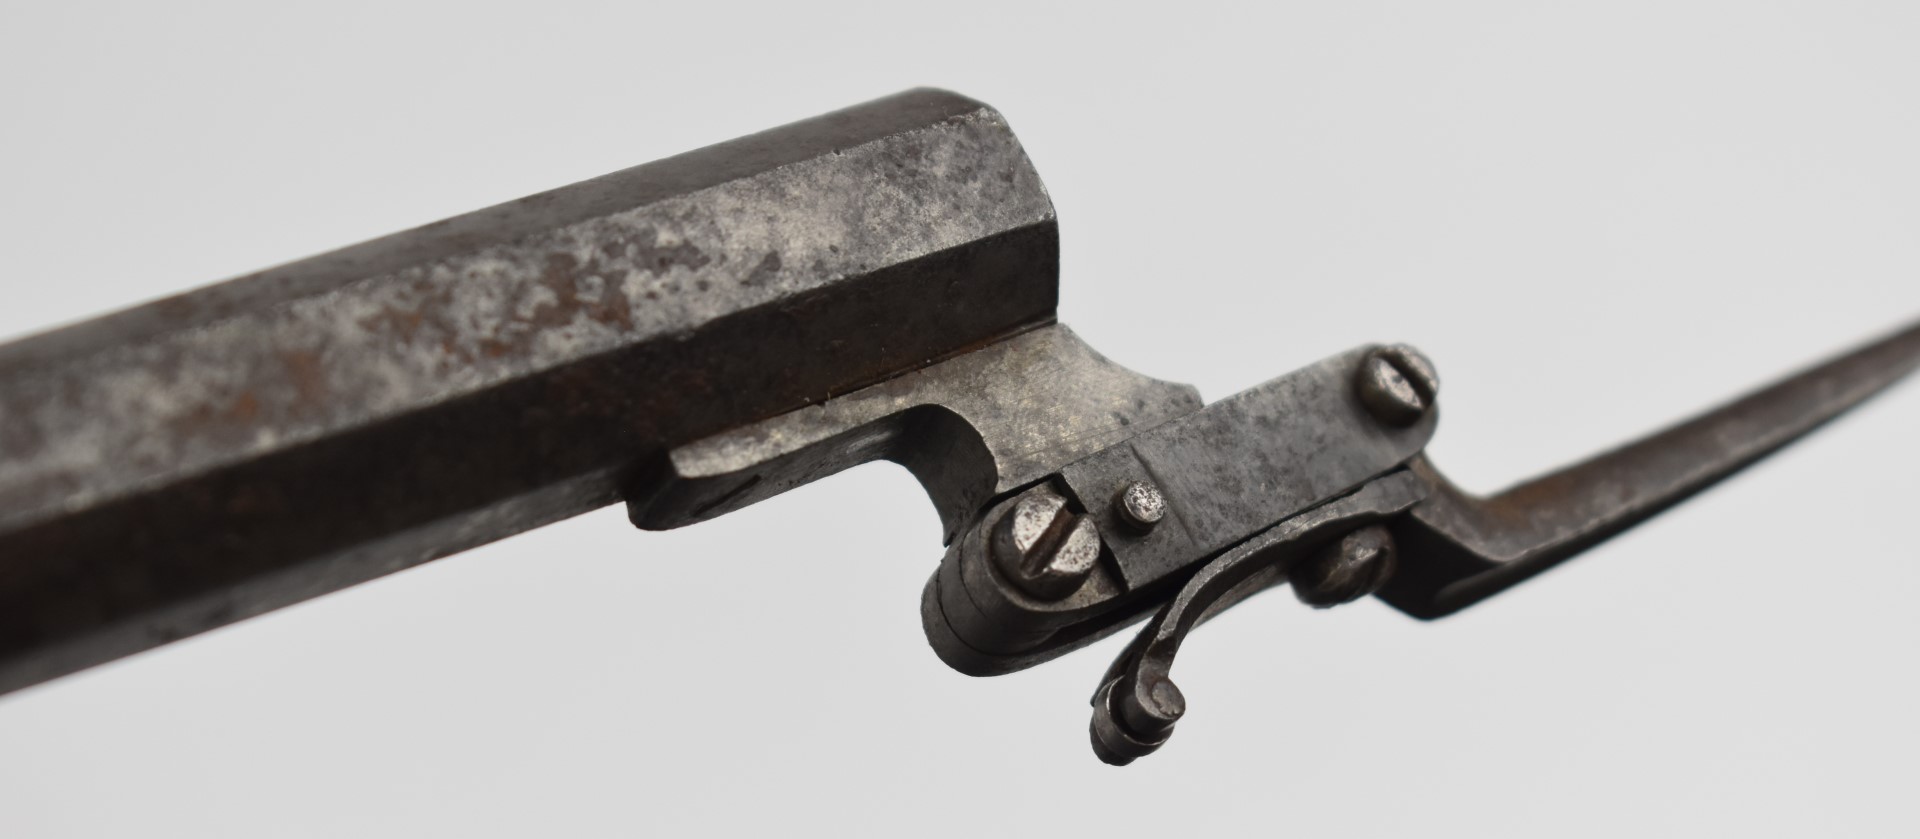 Belgian percussion hammer action pocket pistol with sprung bayonet, trigger guard bayonet release, - Image 11 of 12